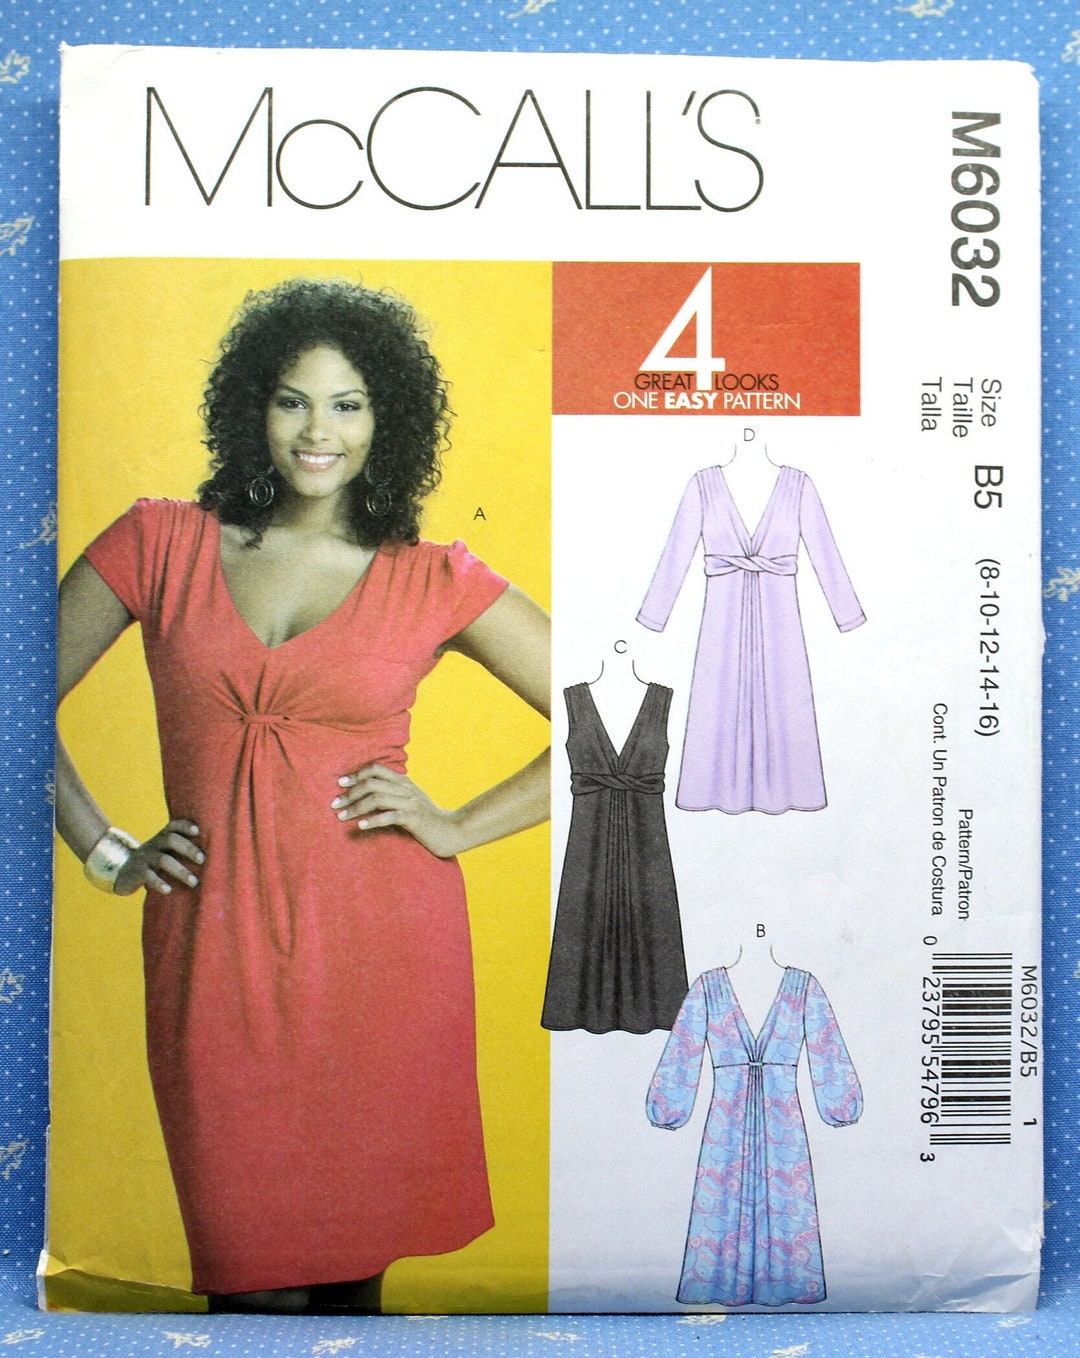 Mccall's Sewing Pattern 6032 Misses' Easy Knit - Etsy